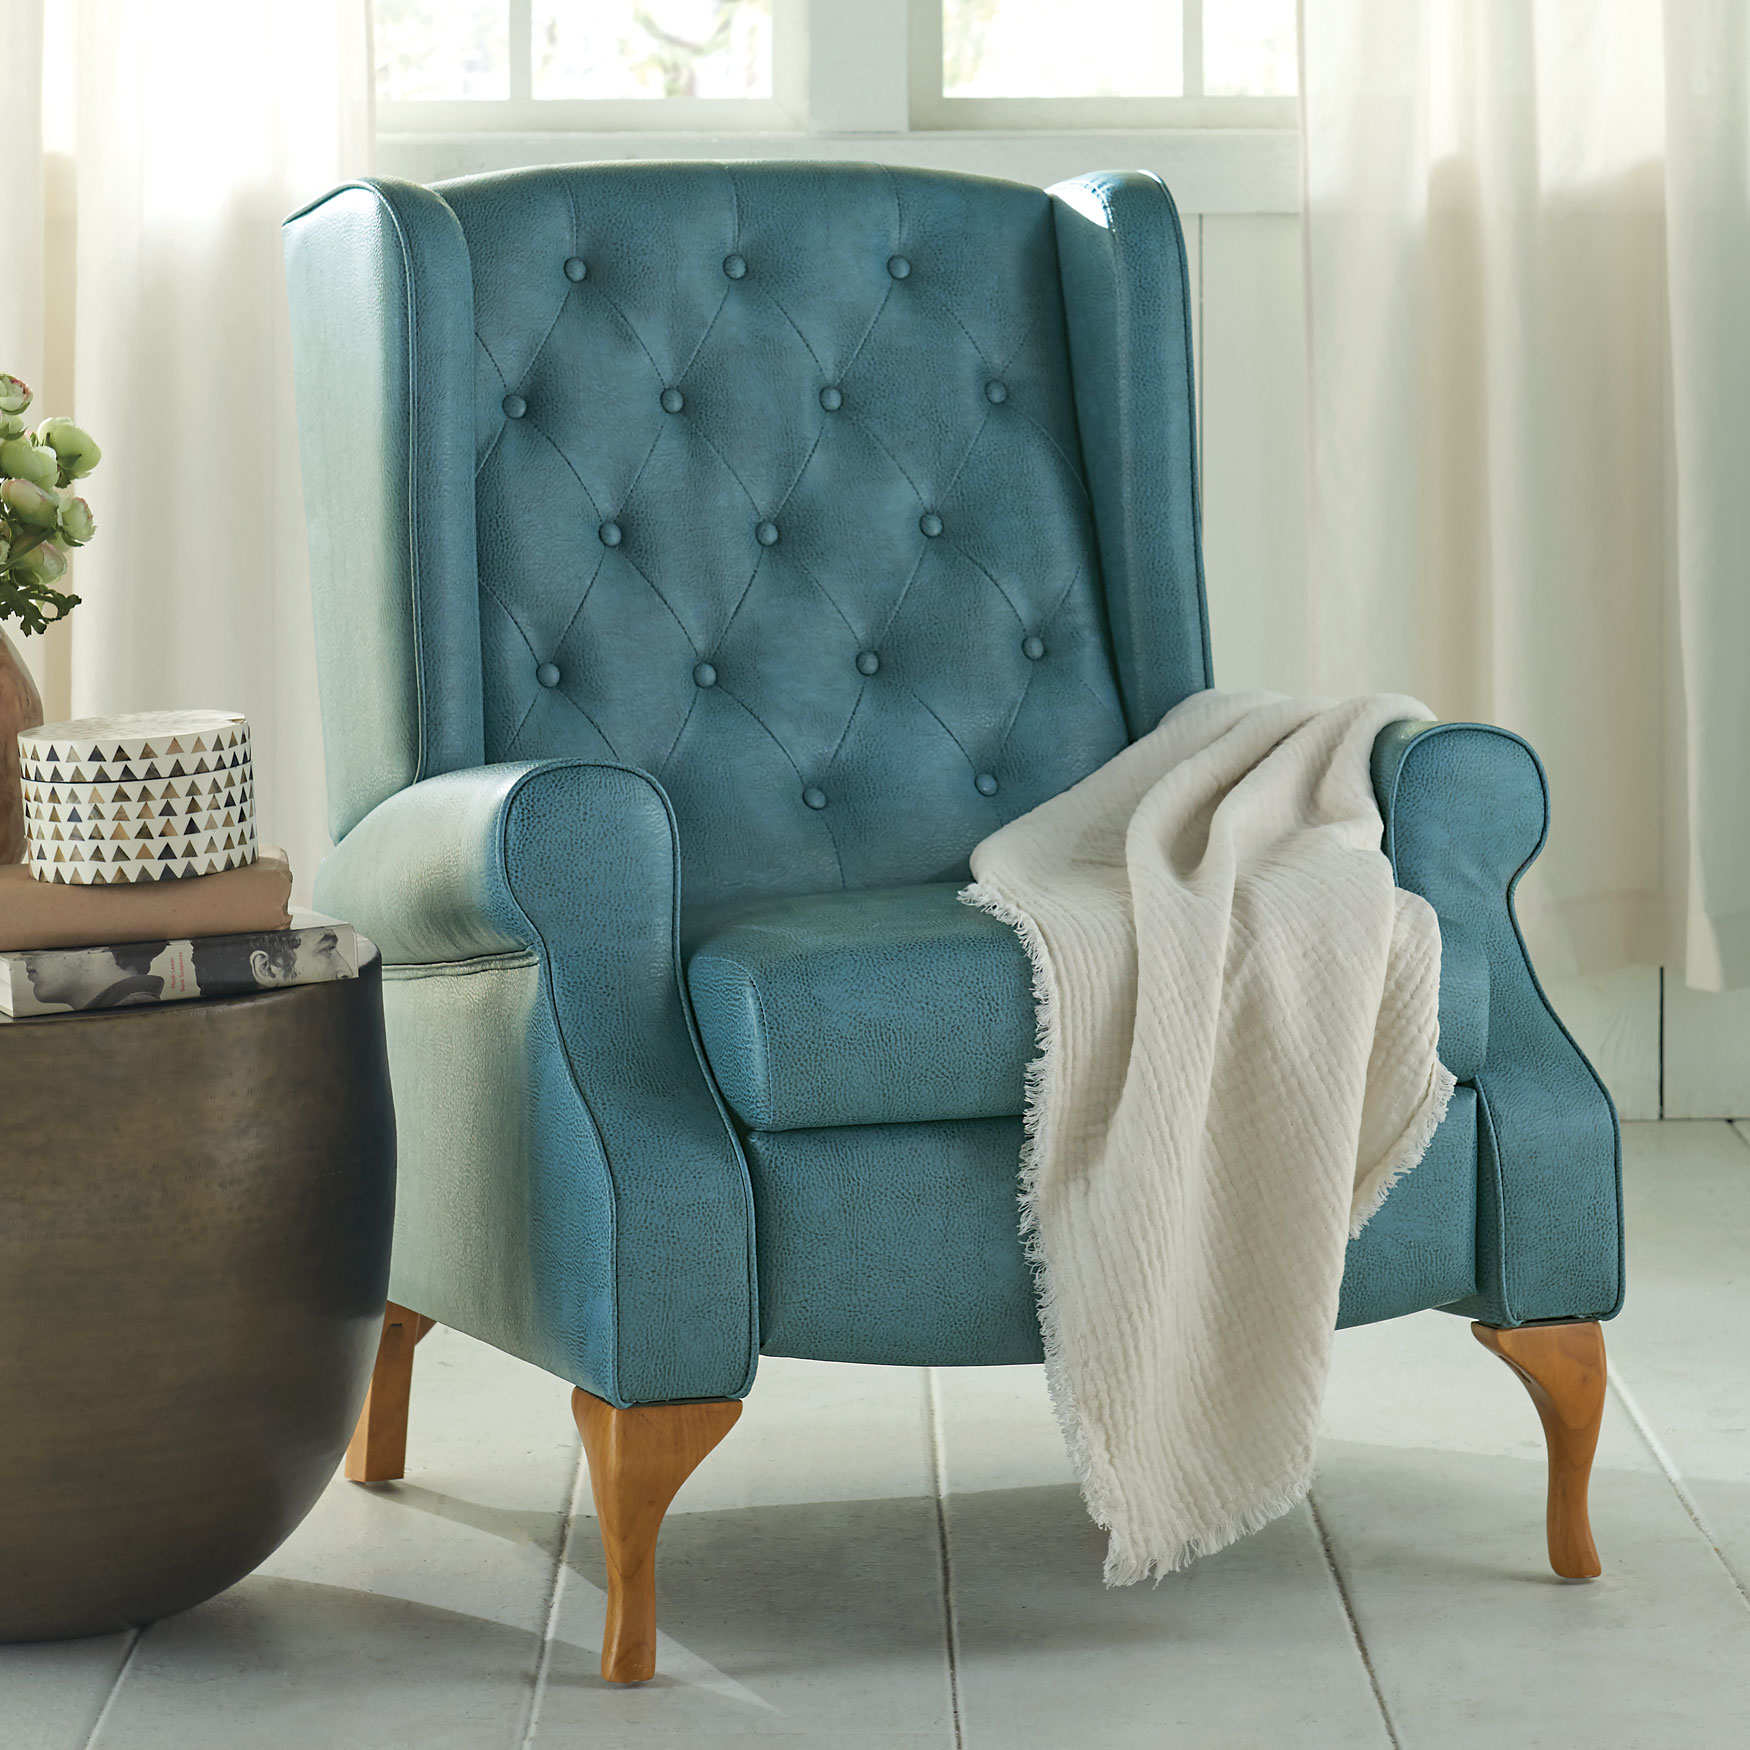 Queen Anne Style Tufted Wingback Recliner| Chairs & Recliners | Brylane ...